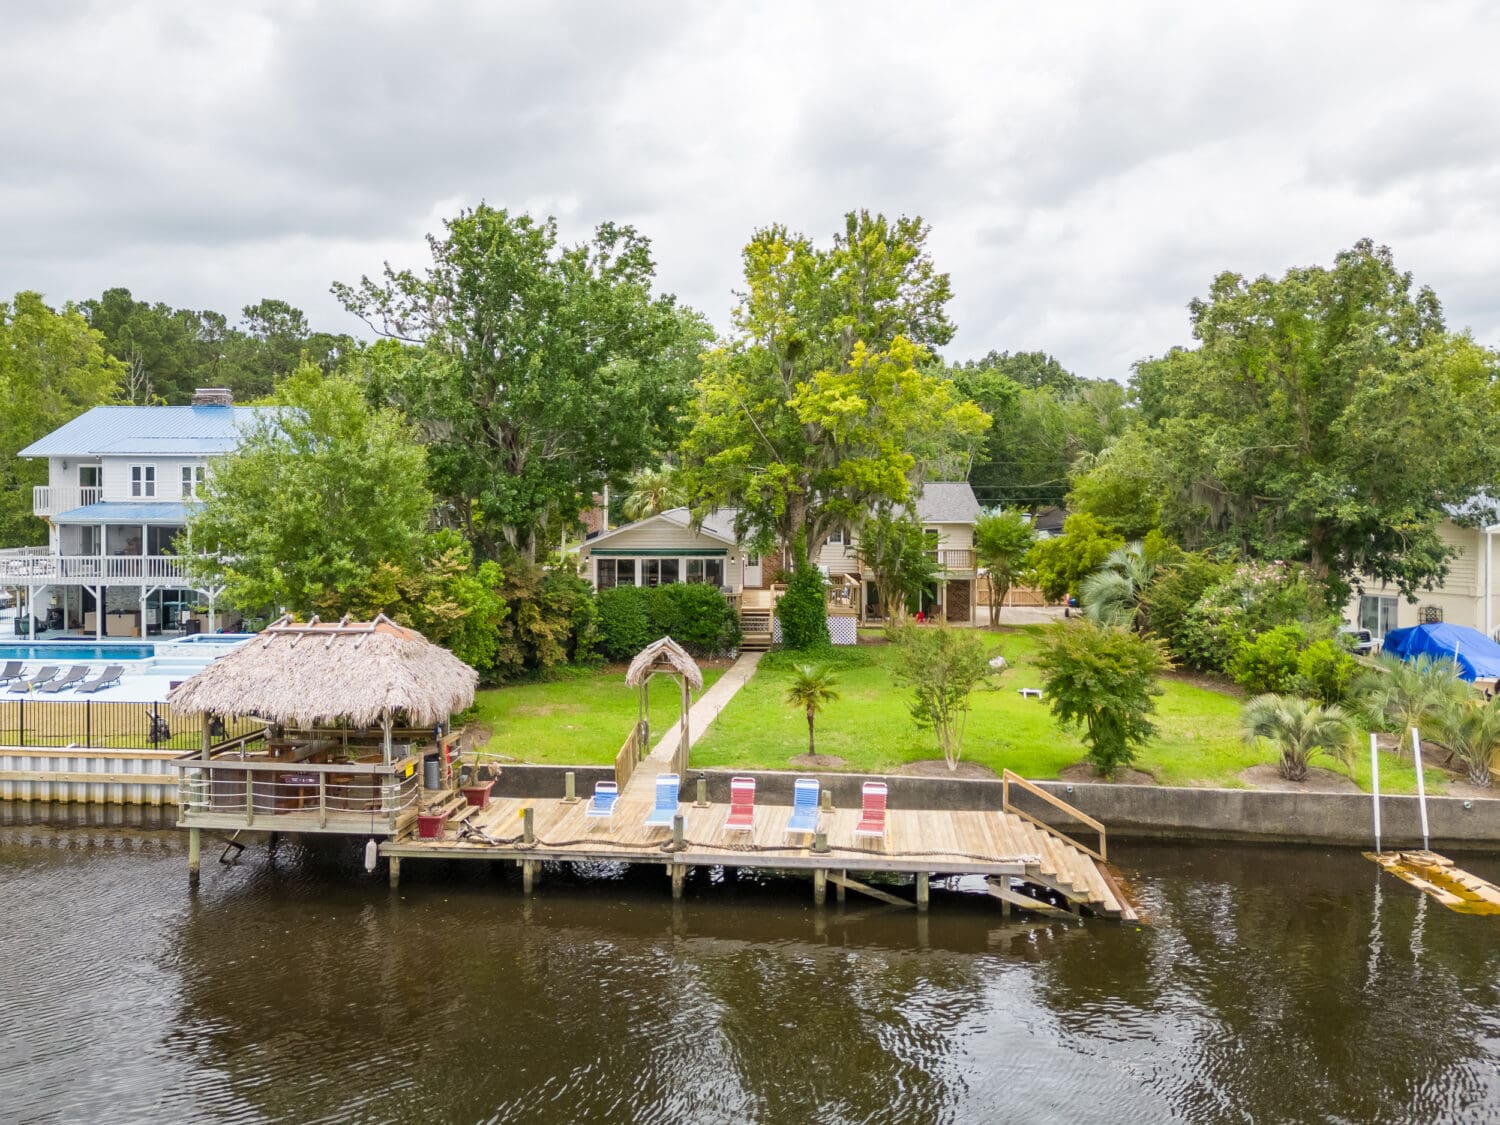 Drone picture of dock of home on the Intracoastal Waterway - Harbour Towne - Myrtle Beach